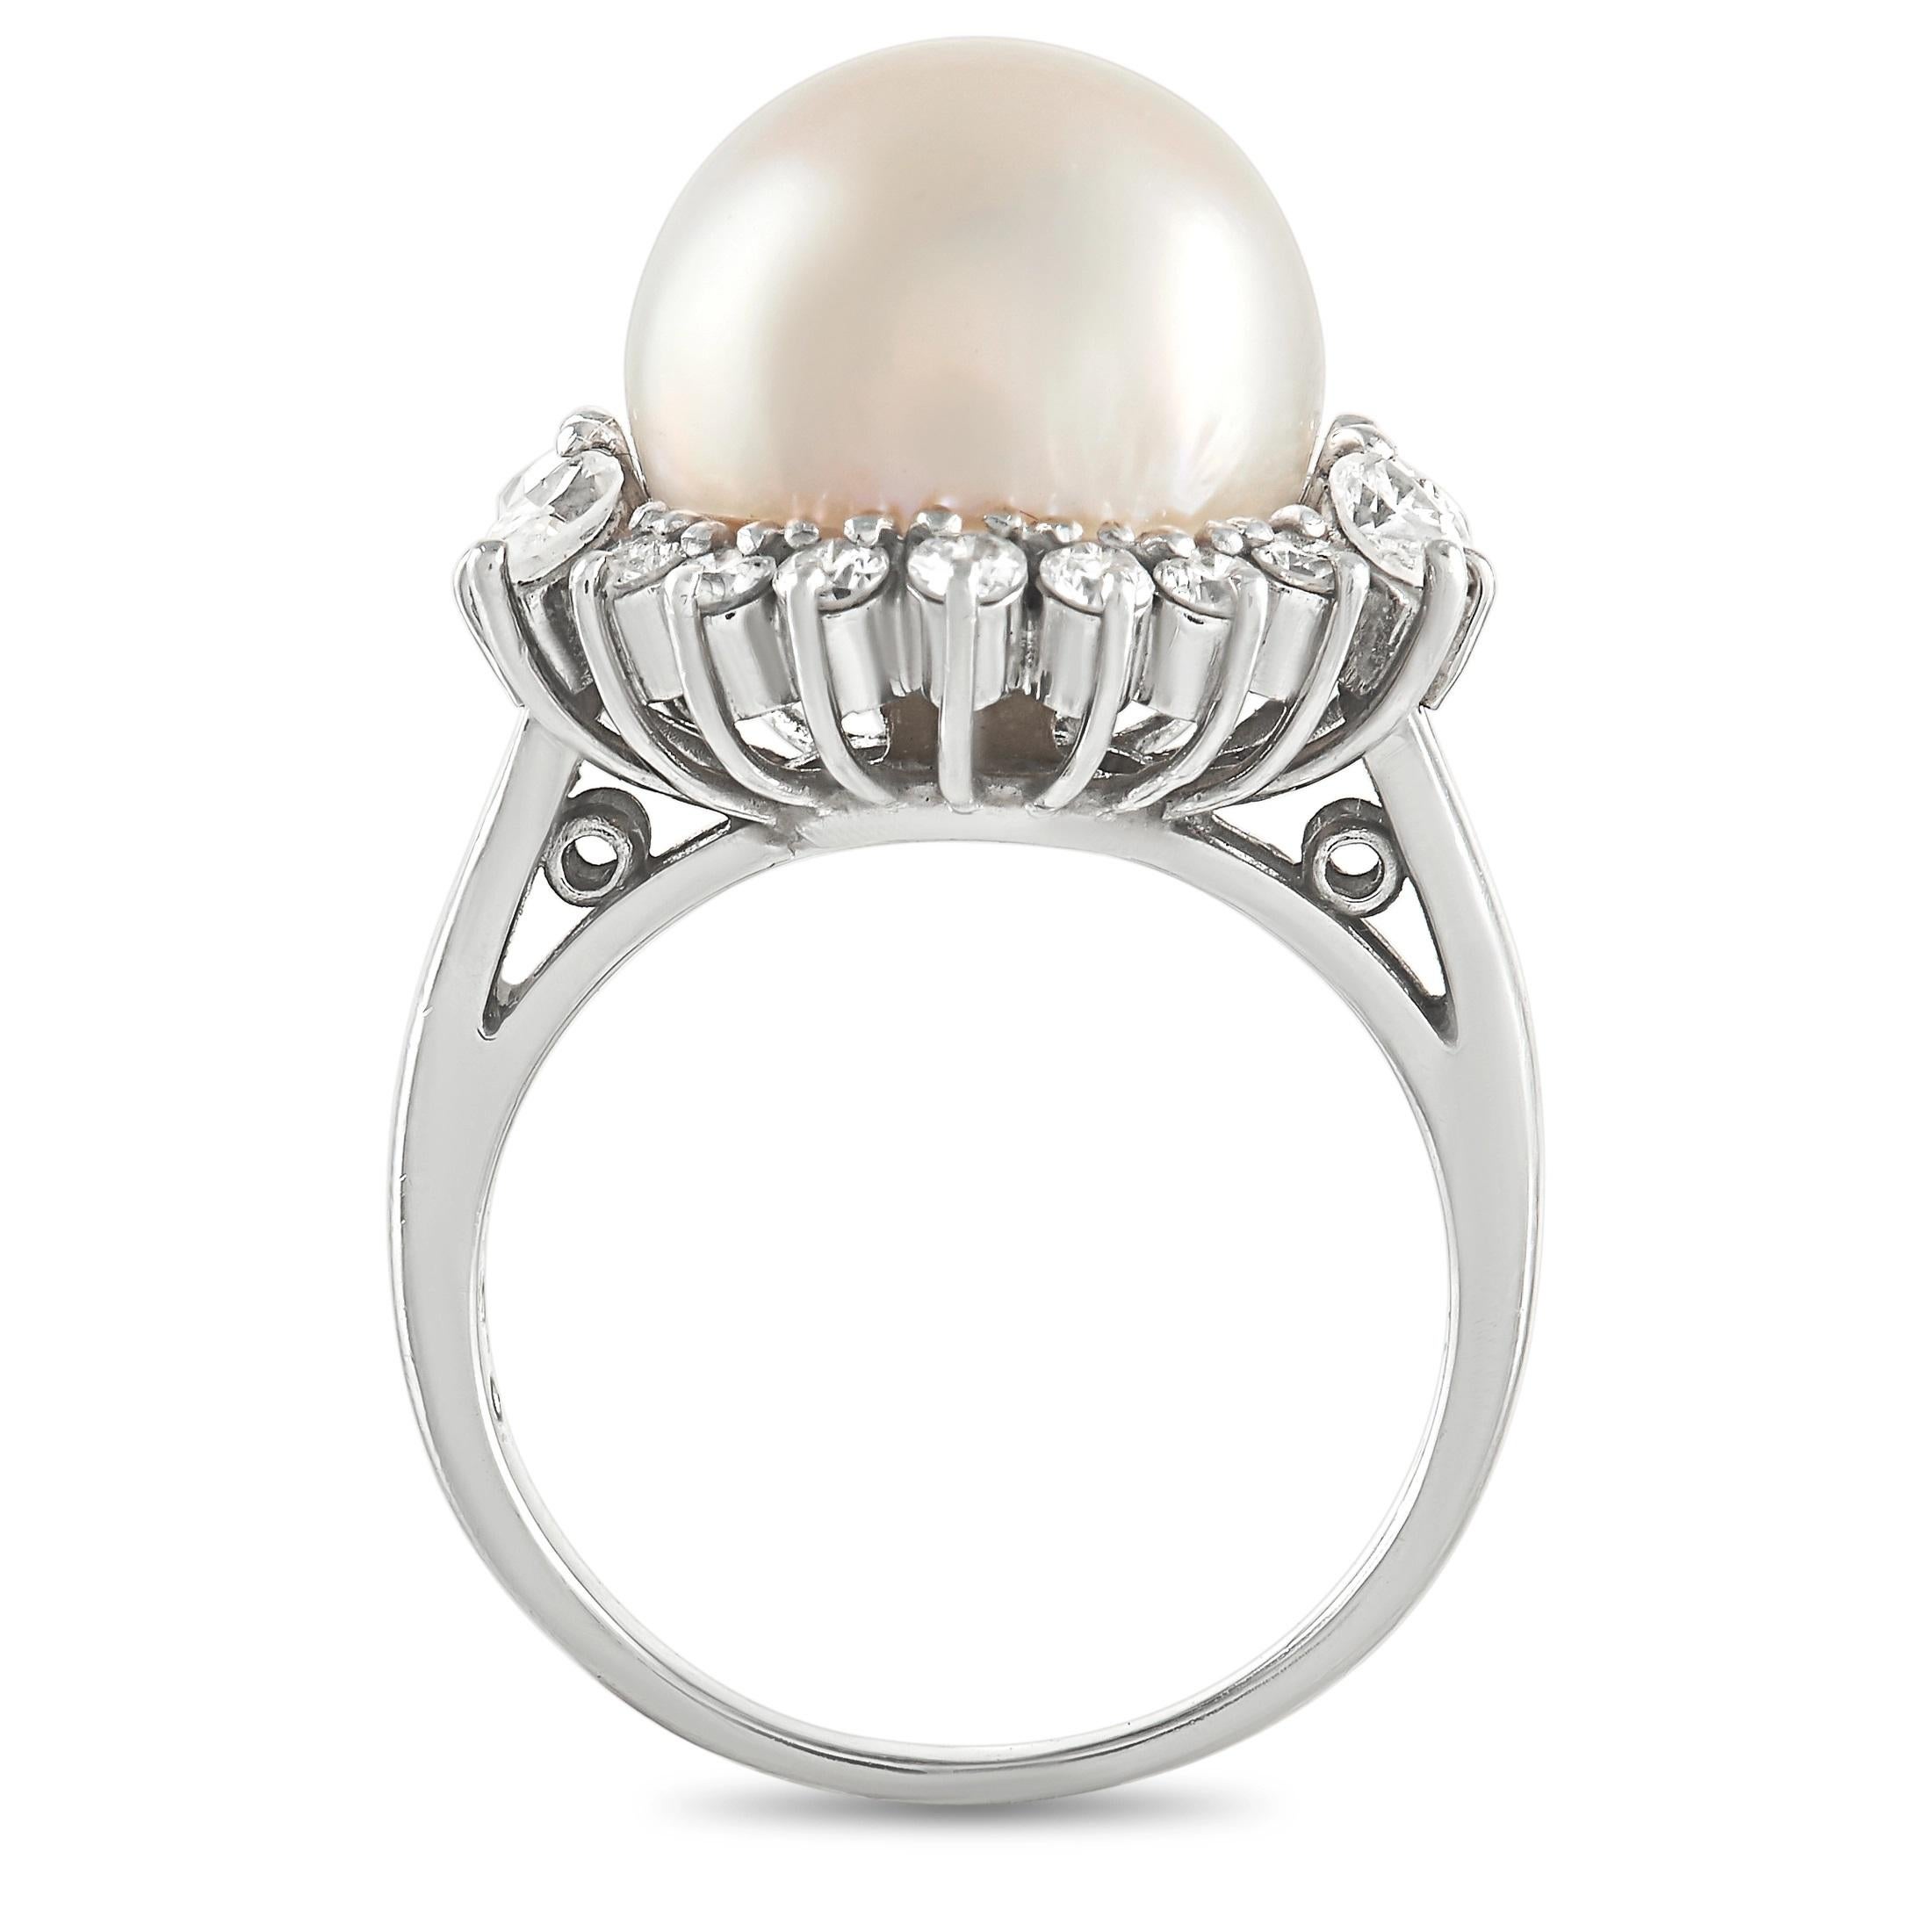 This impeccably crafted Tasaki ring will always make a statement. Perched atop a 2mm band crafted from pure platinum, you’ll find a luminous pearl center stone surrounded by a halo of diamonds totaling 0.90 carats. A 14mm top height means this piece